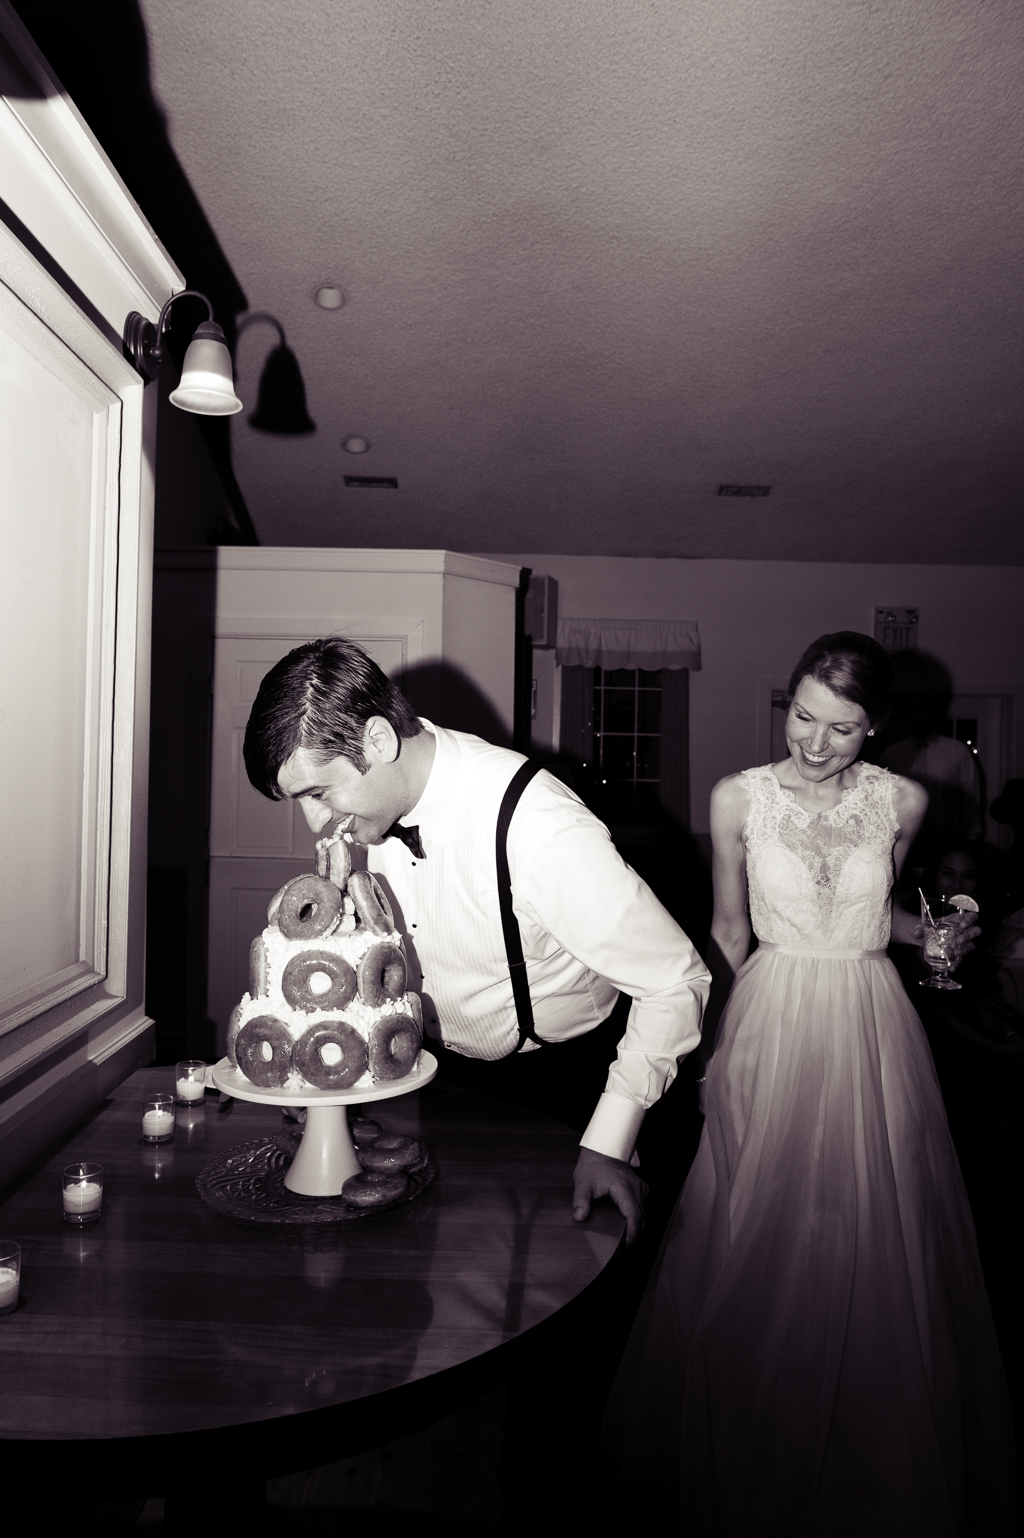 groom eats a donut directly off the top of his groom's cake on his wedding day